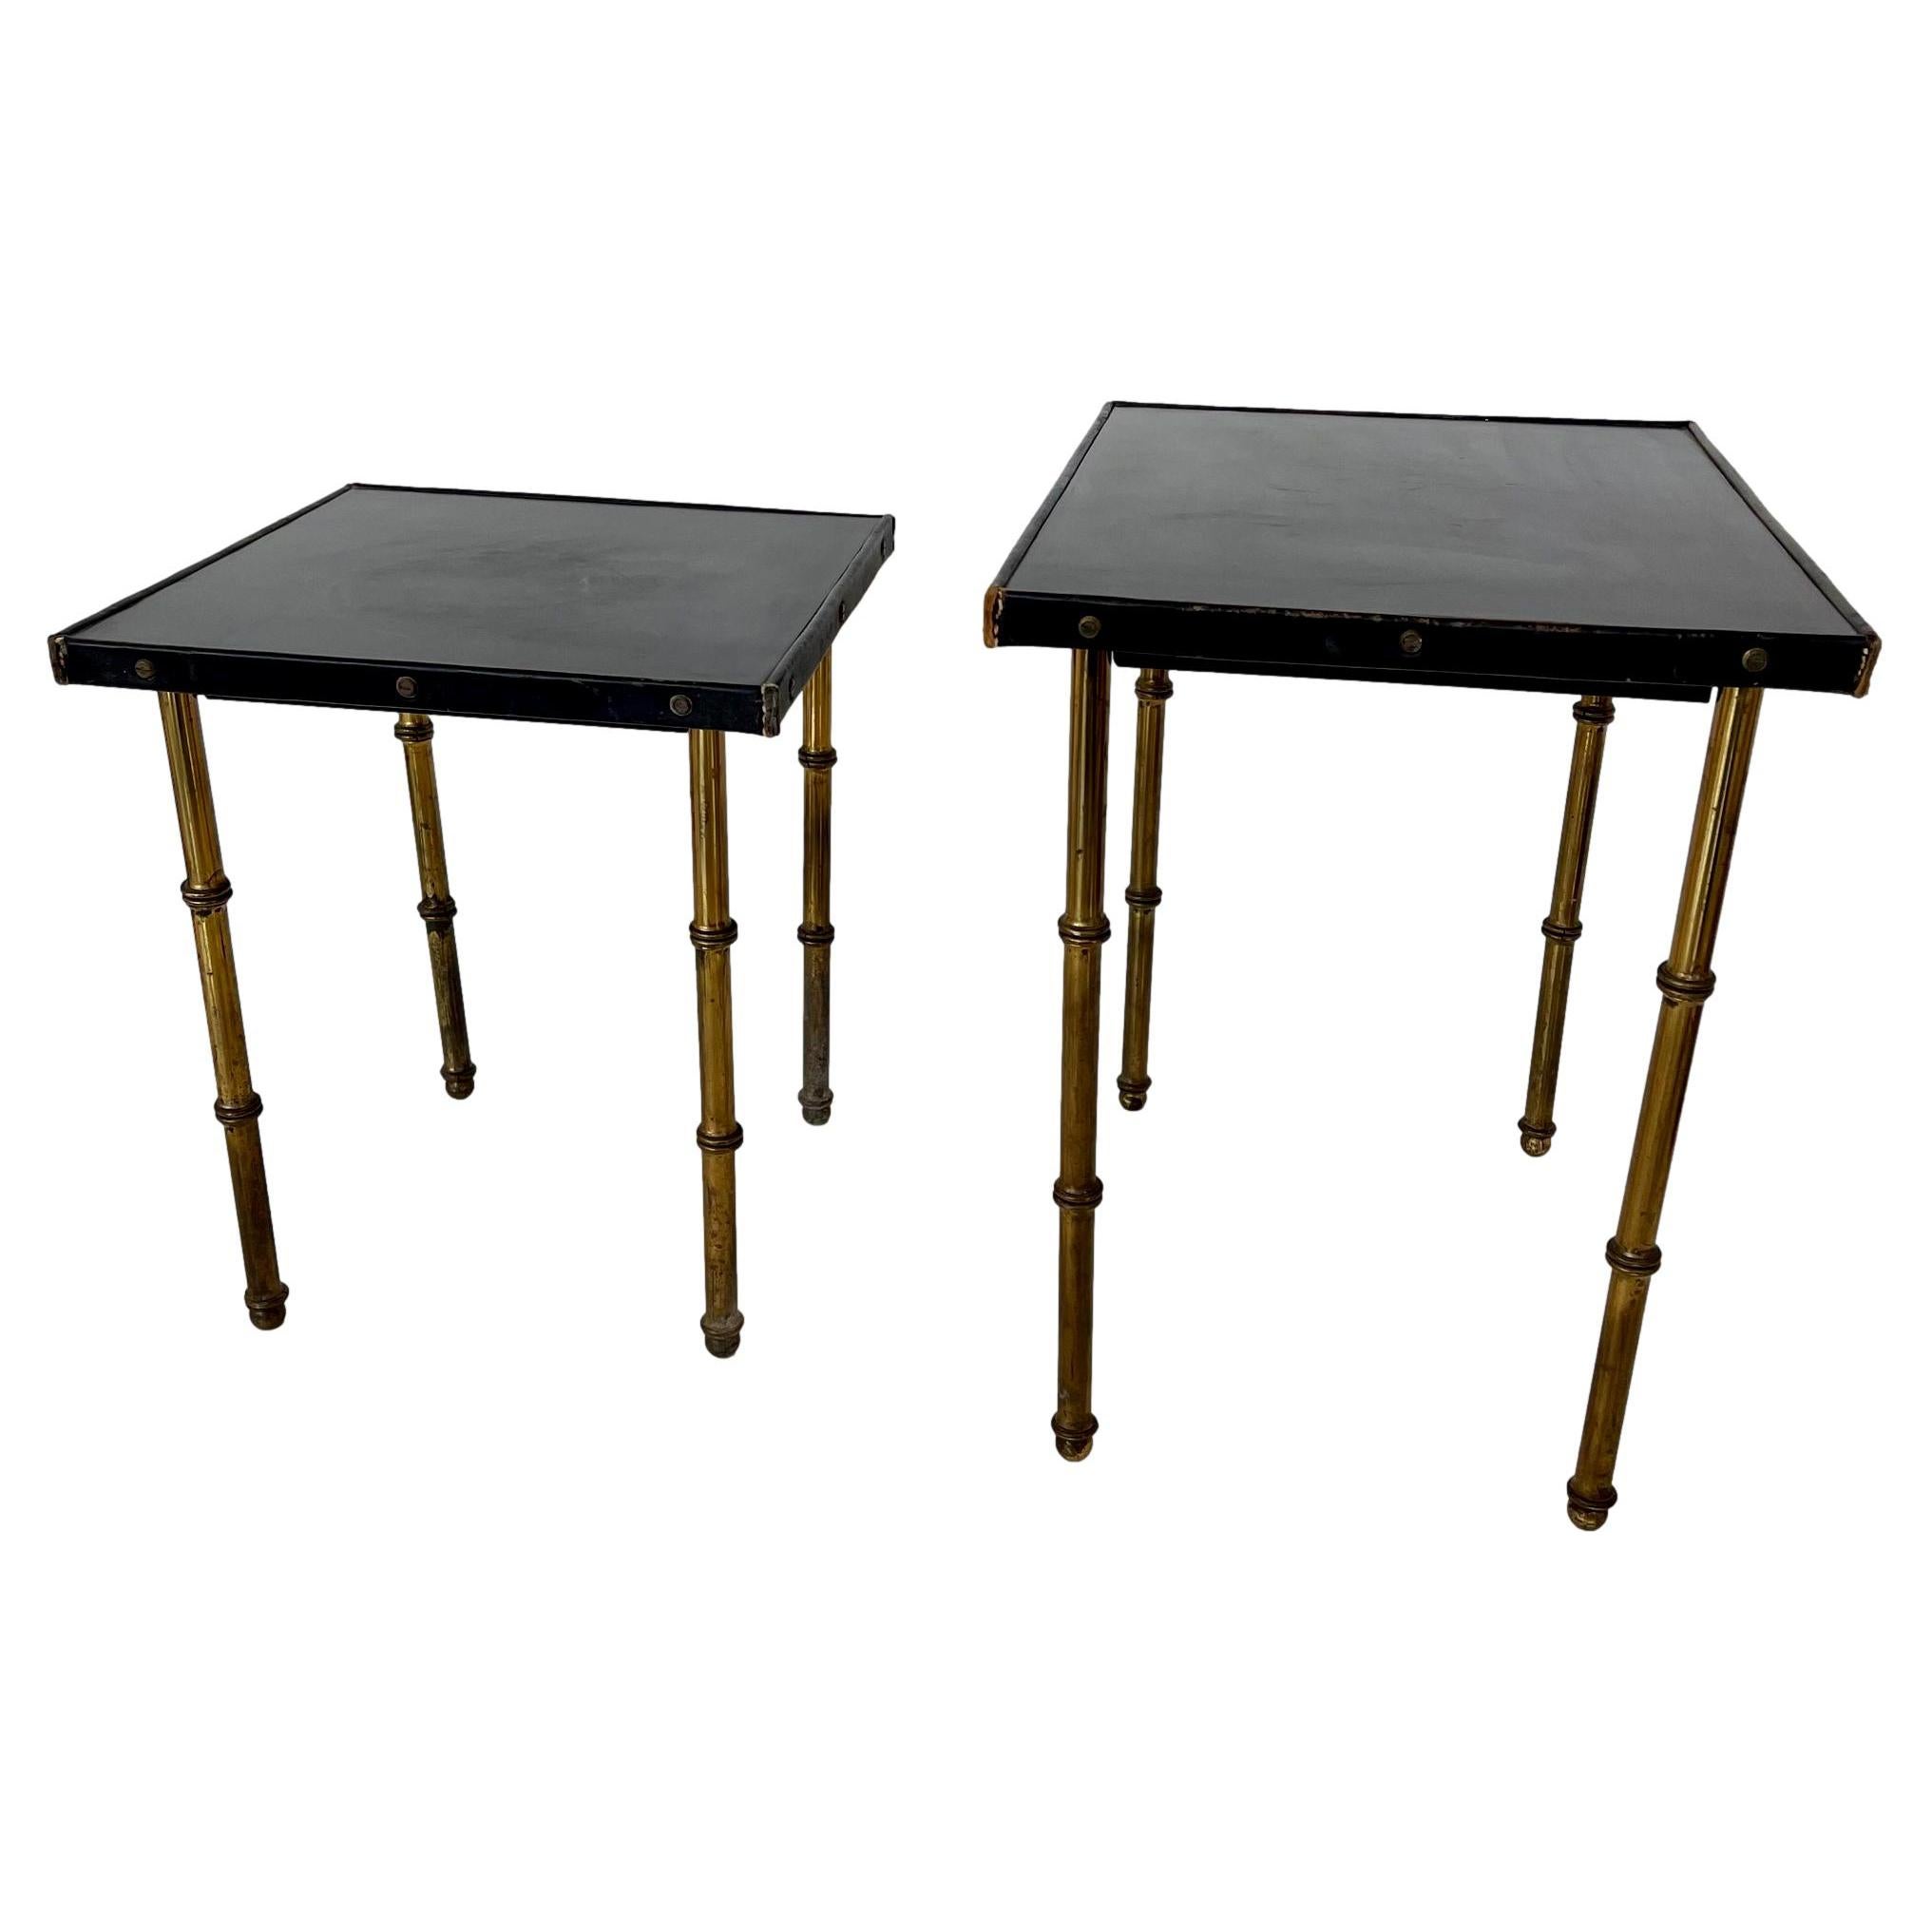 Pair of Jacques Adnet Leather and Brass Nesting Tables, 1950s France